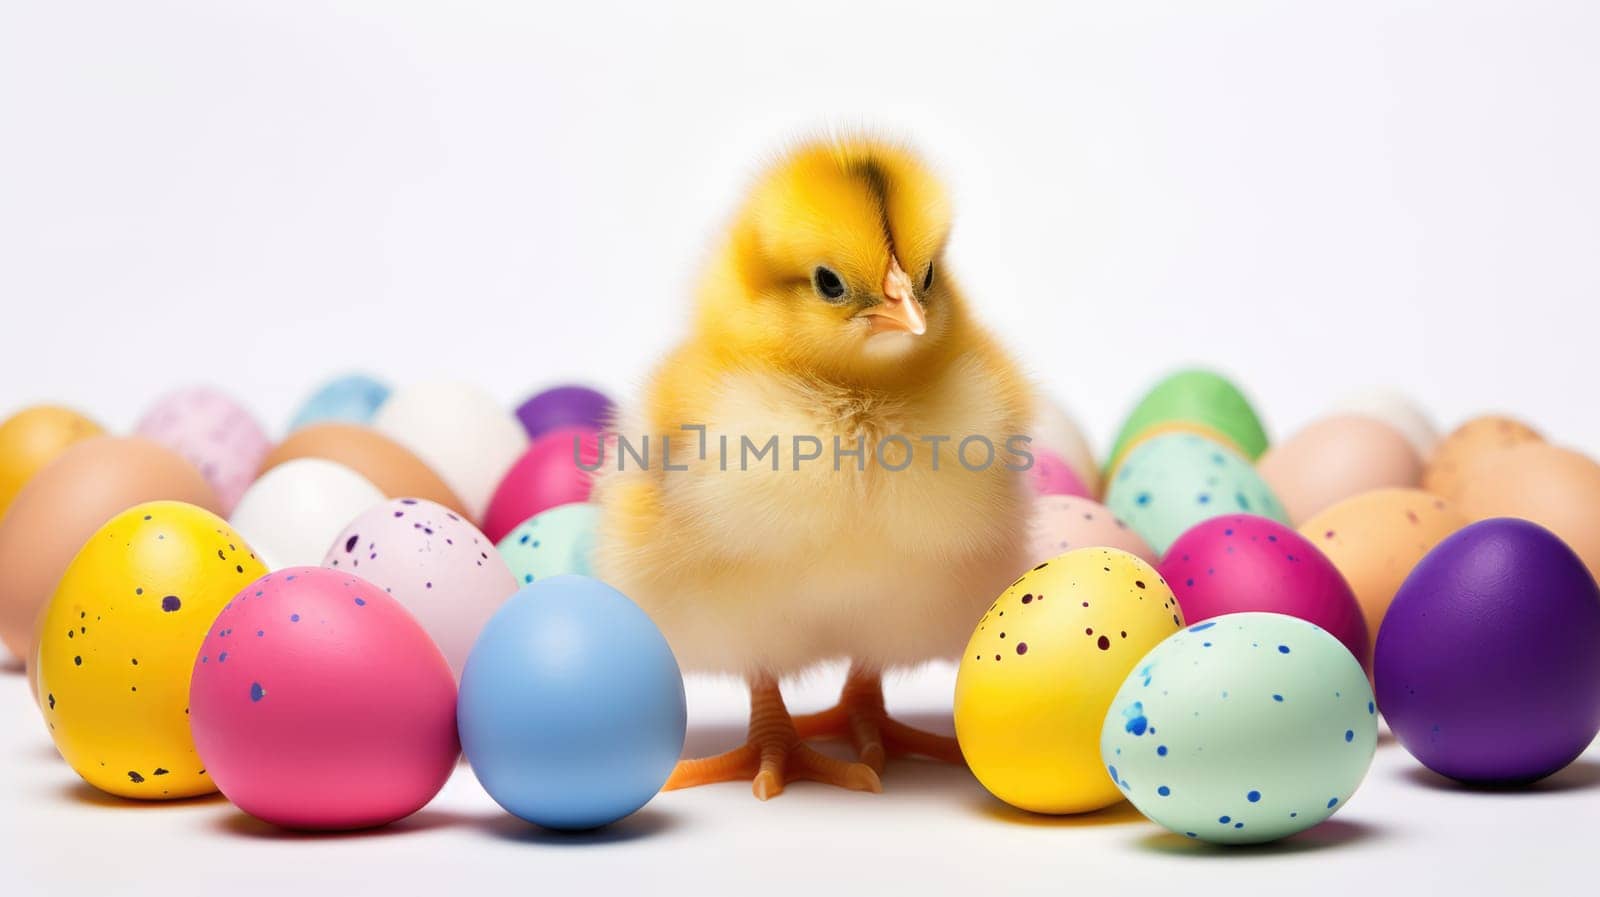 Fluffy yellow baby chick standing in front of colorful Easter eggs by JuliaDorian